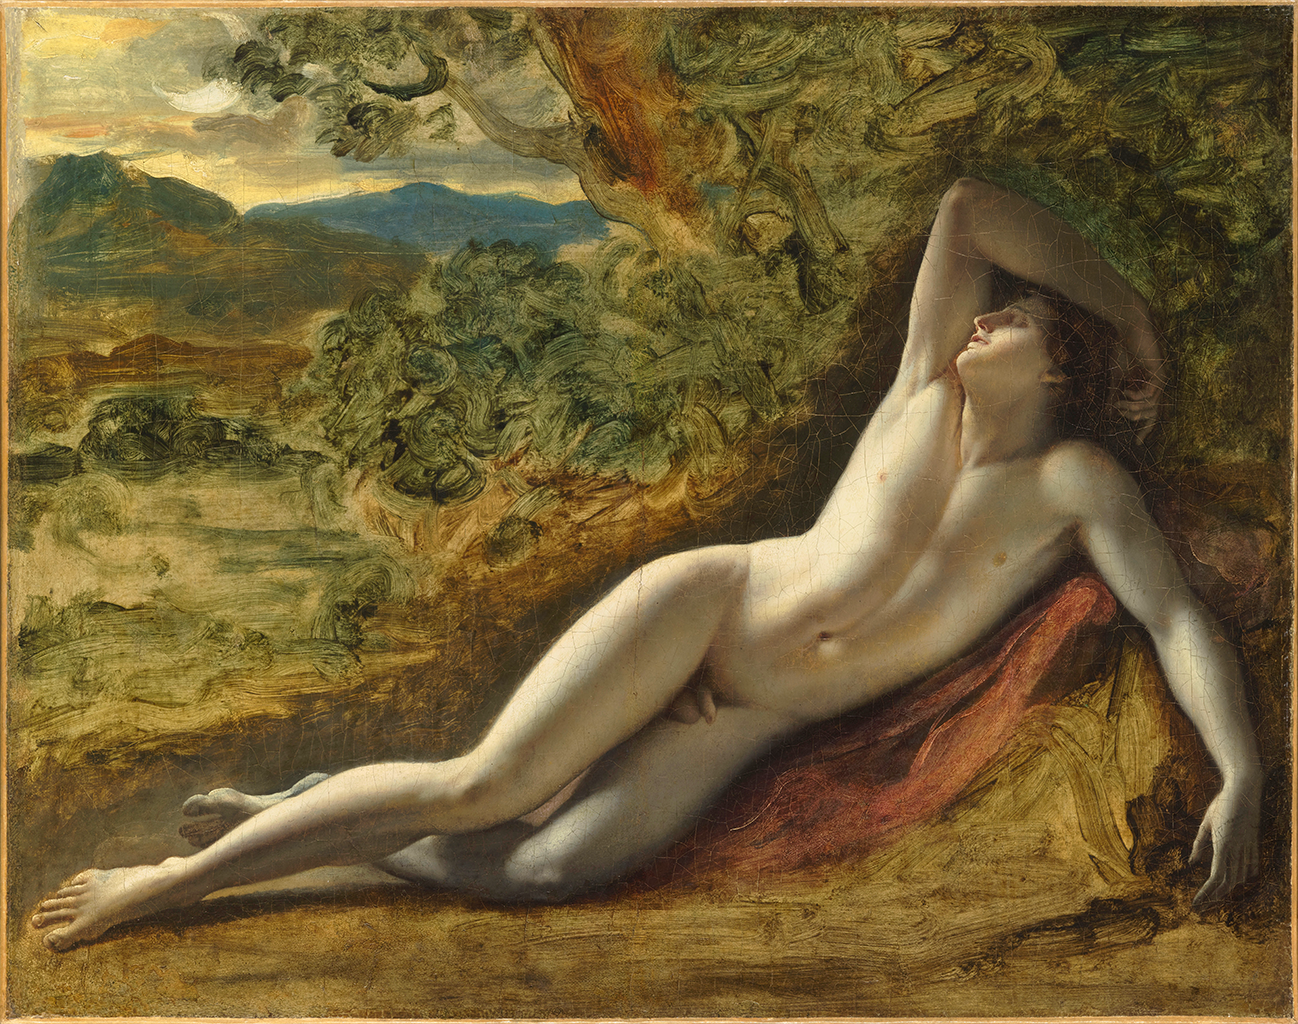 A painting of a pale skin-toned man lying naked, as he has his back pushed against the edge of the brush. He covers the top of his head with his arm and his eyes are closed. Behind him are thick brushstrokes that make up a forest background.